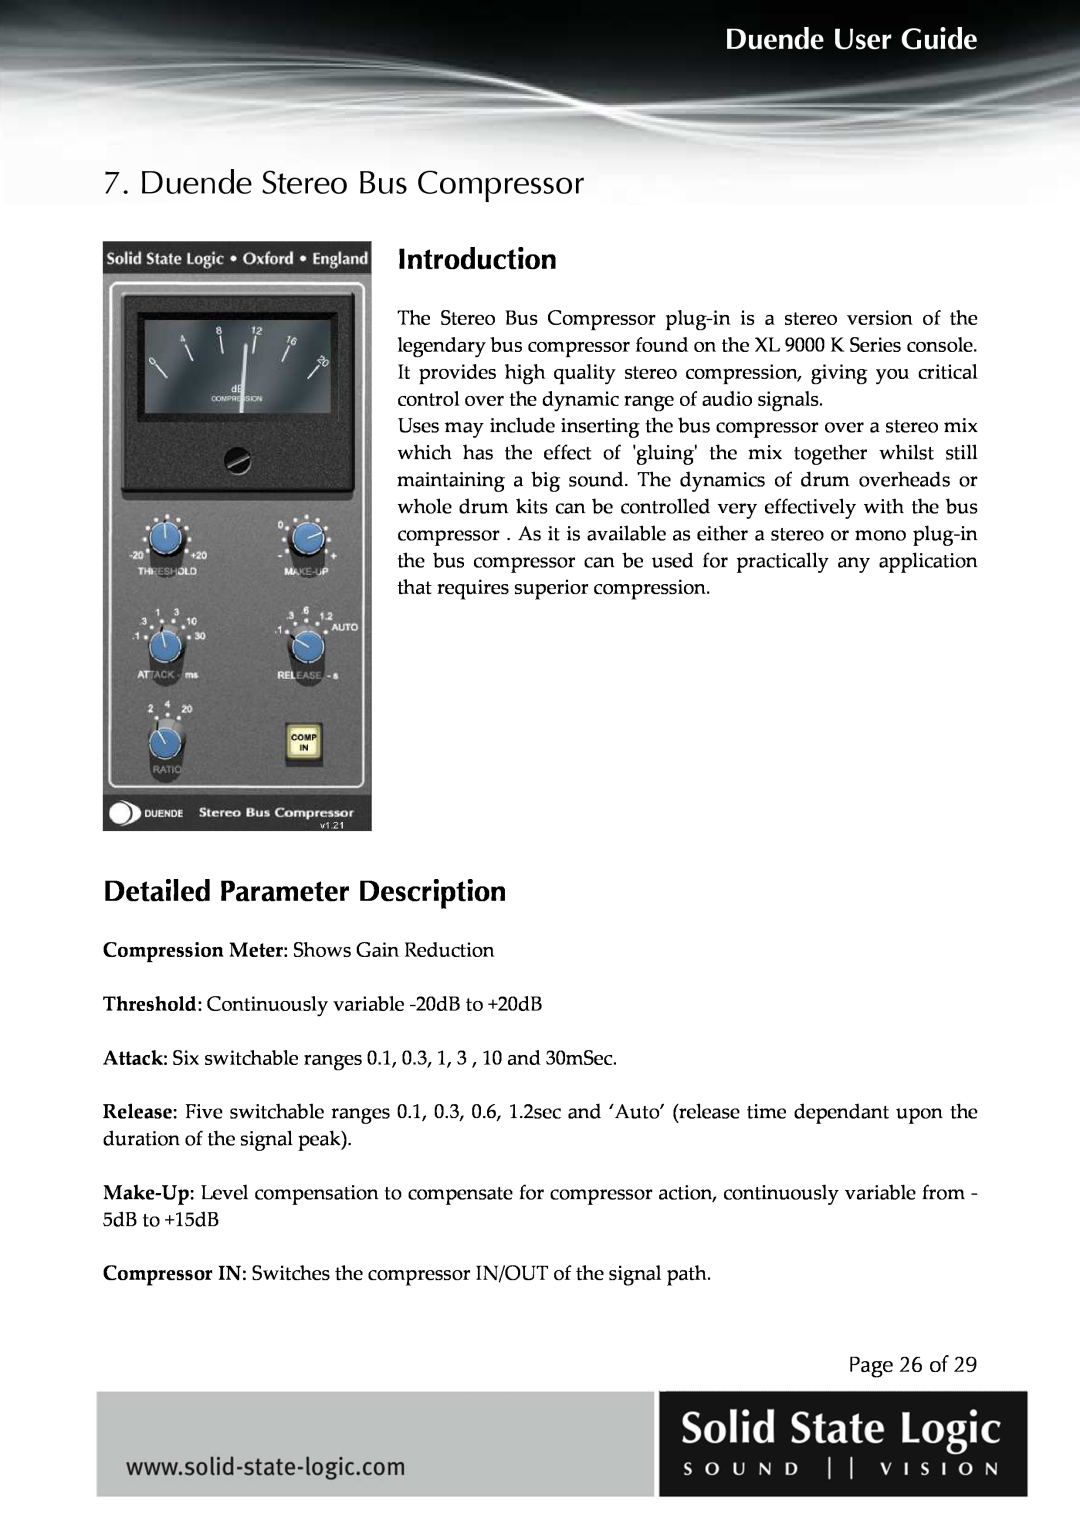 Solid State Logic DUENDE manual Duende Stereo Bus Compressor, Introduction, Detailed Parameter Description, Page 26 of 